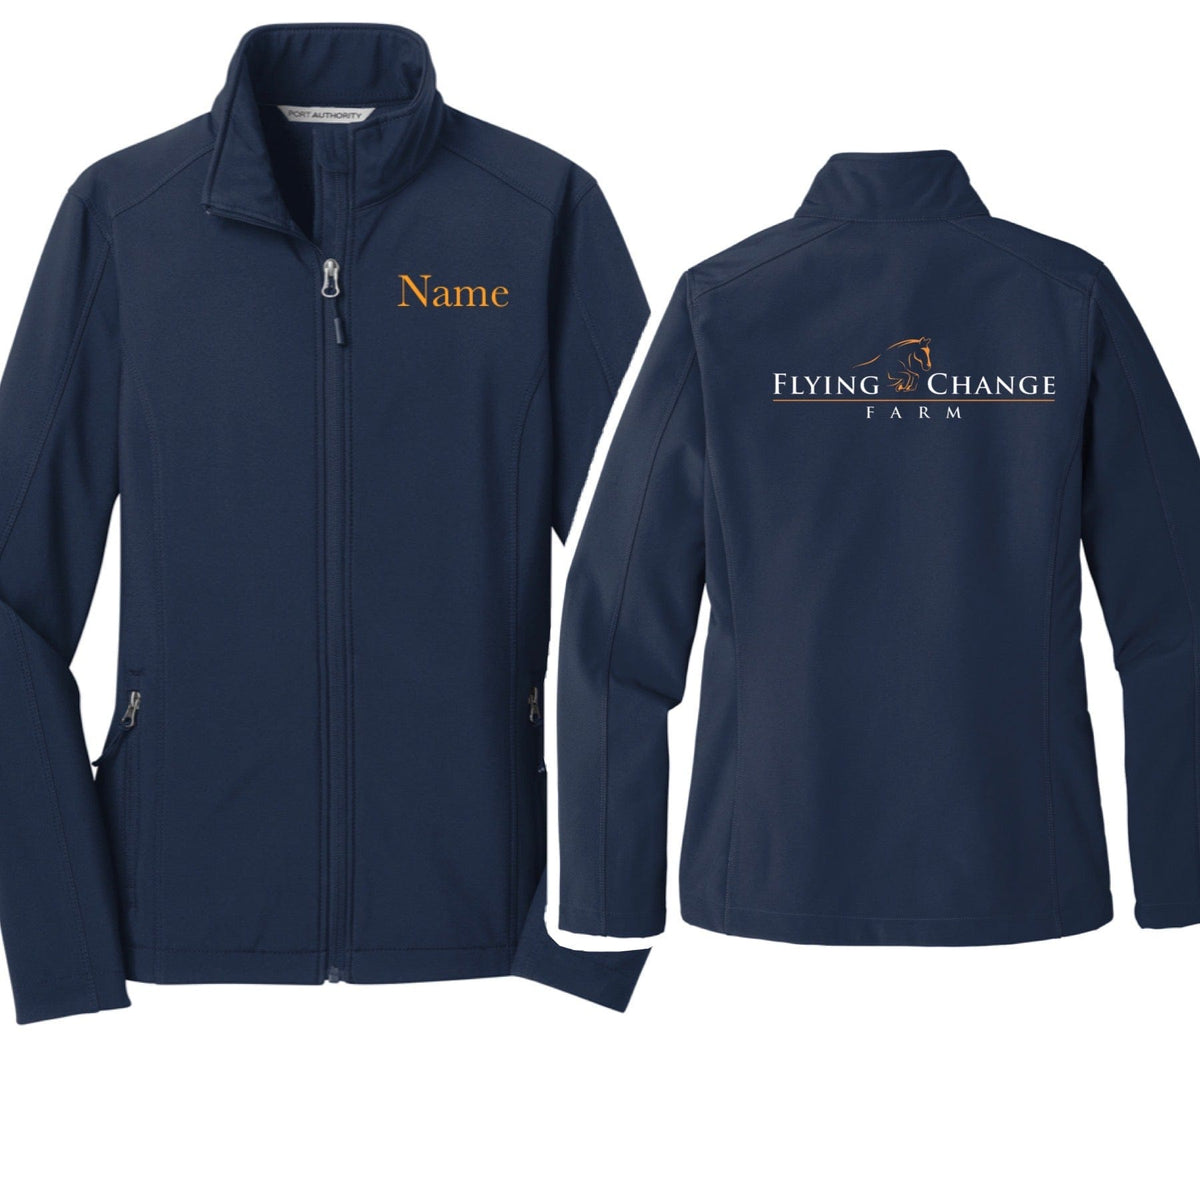 Equestrian Team Apparel Flying Change Farm Shell Vest and Jacket equestrian team apparel online tack store mobile tack store custom farm apparel custom show stable clothing equestrian lifestyle horse show clothing riding clothes horses equestrian tack store